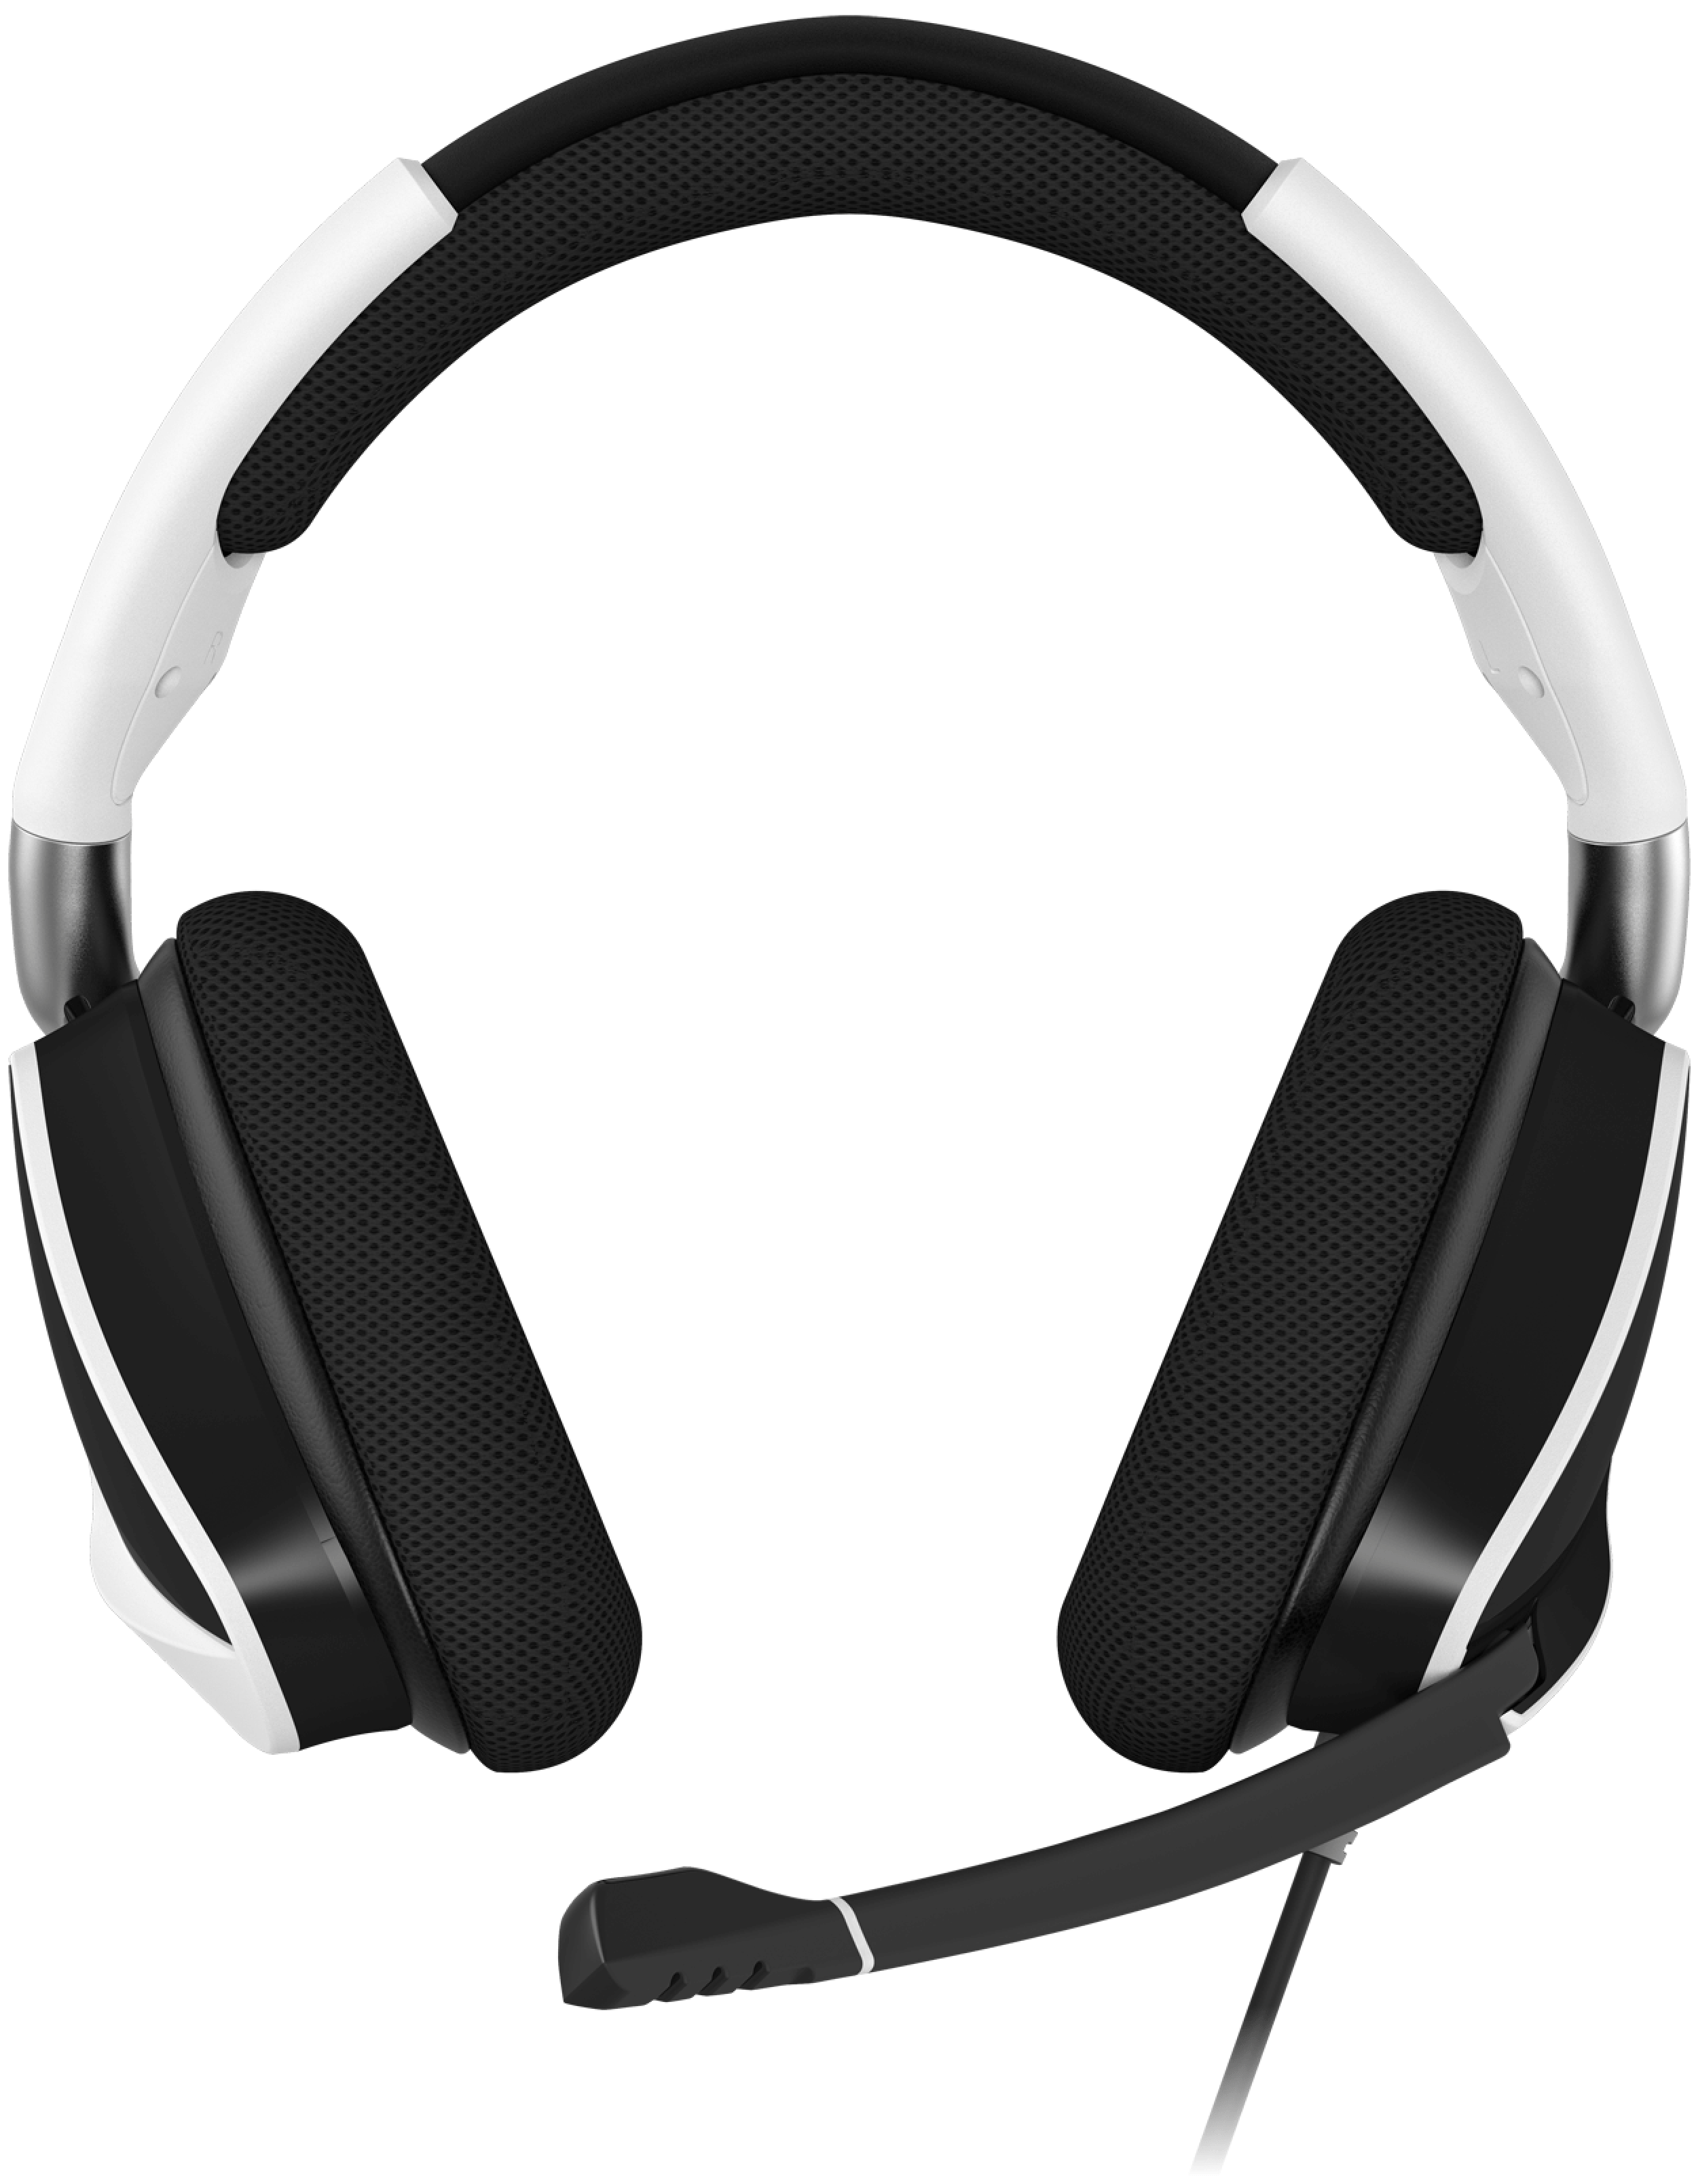 corsair headset compatible with xbox one